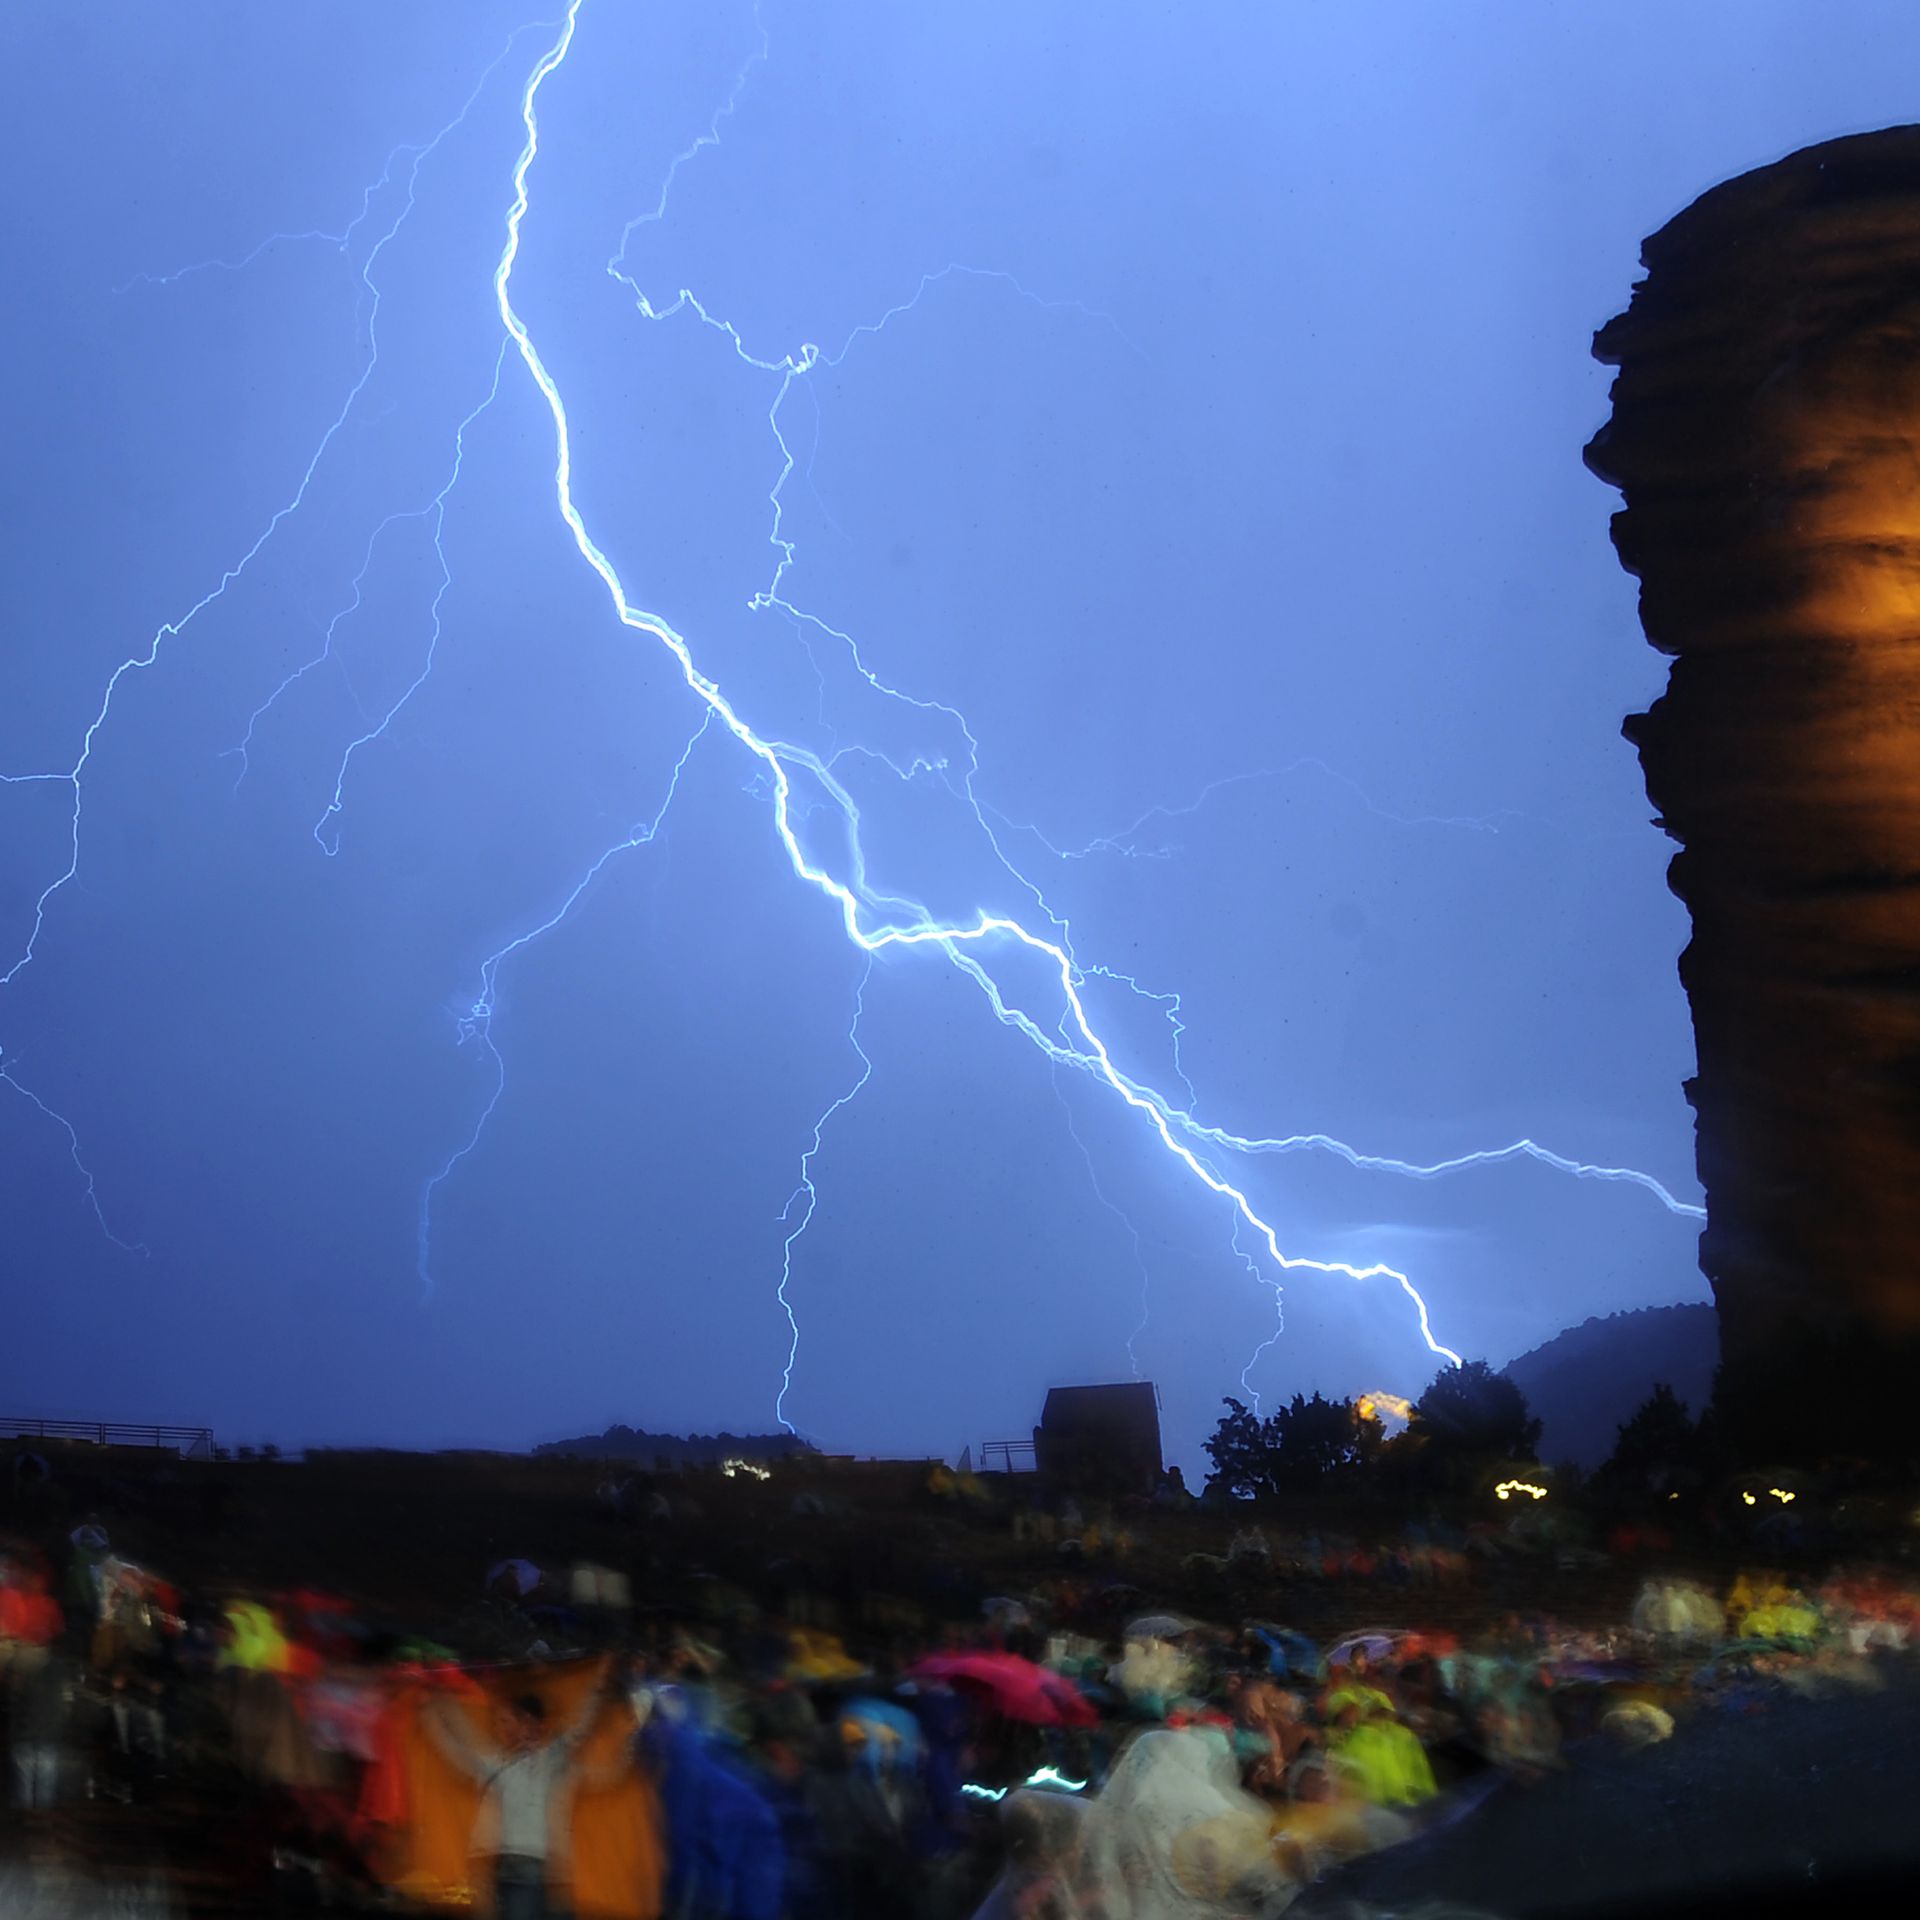 At placere Cyberplads fest Red Rocks makes safety tweaks after hail storm that injured dozens - Axios  Denver